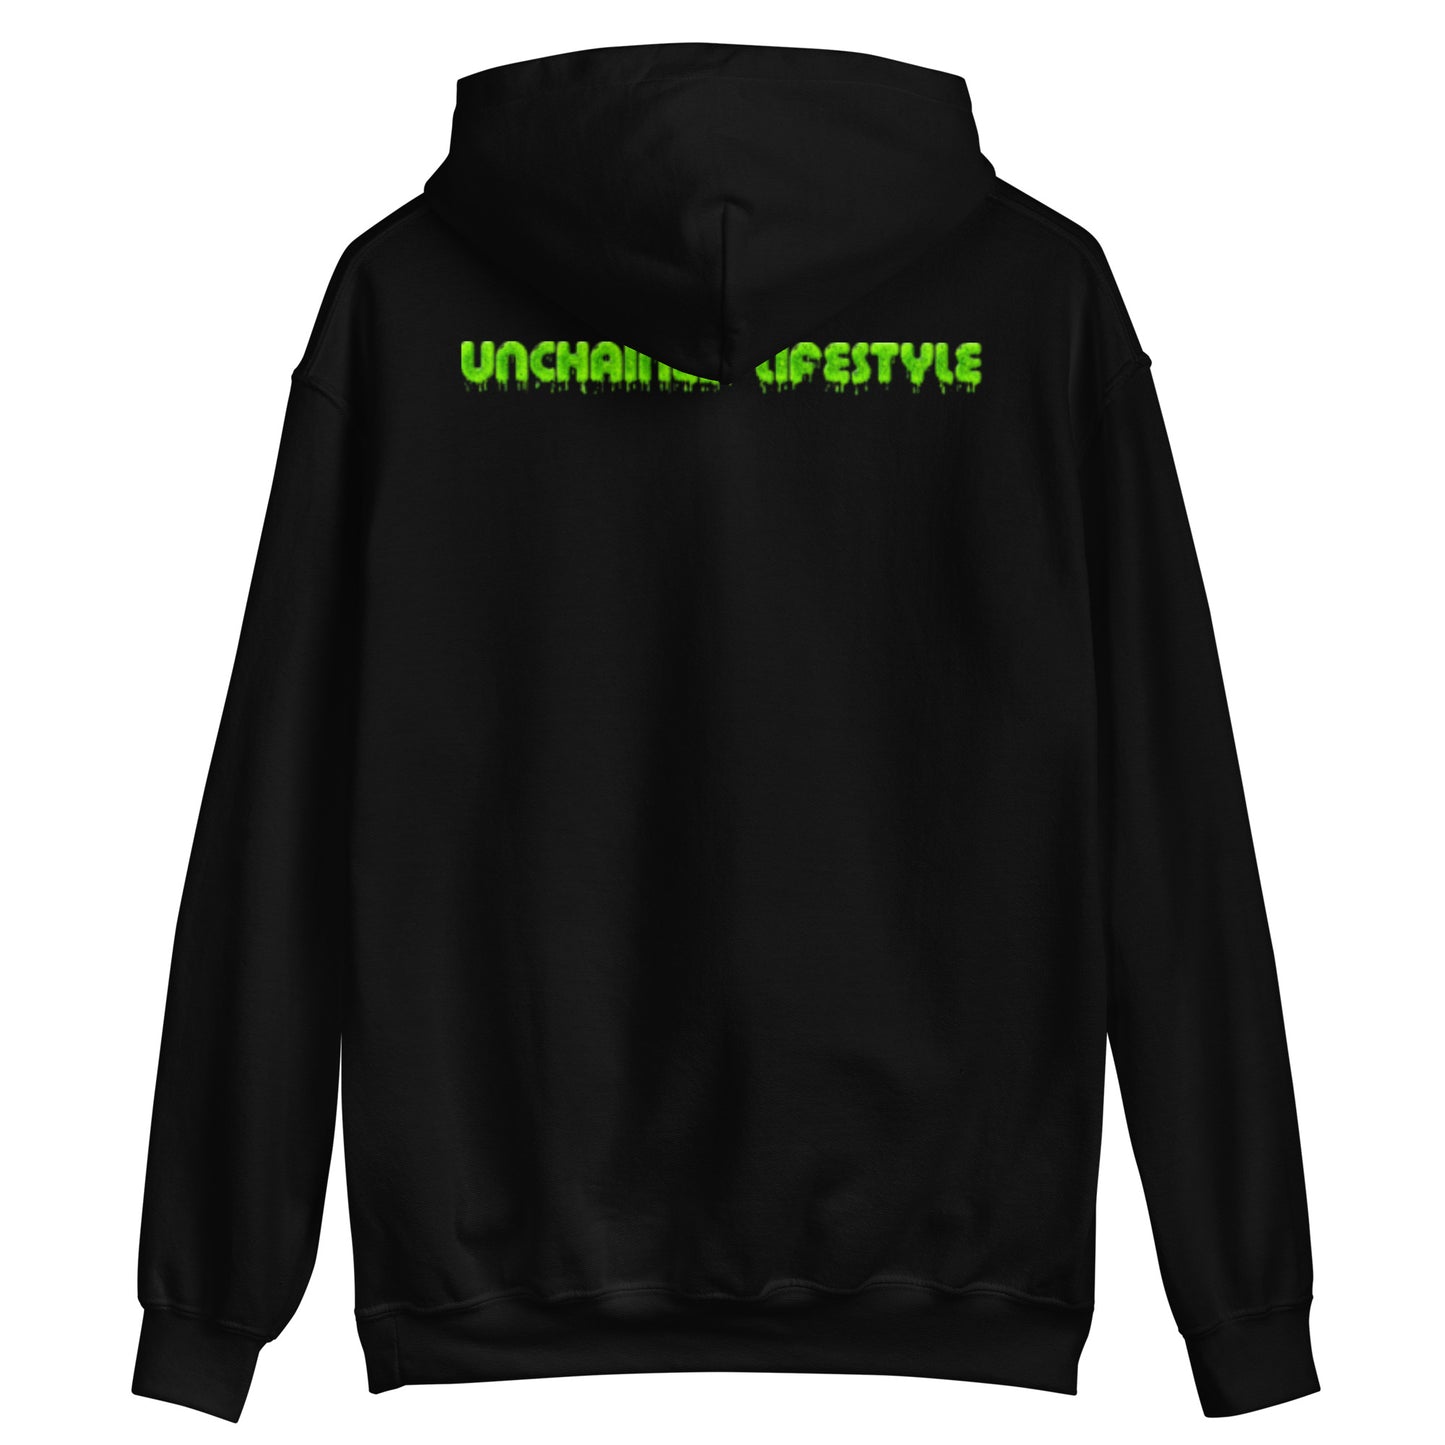 Unchained life style slimed hoodie